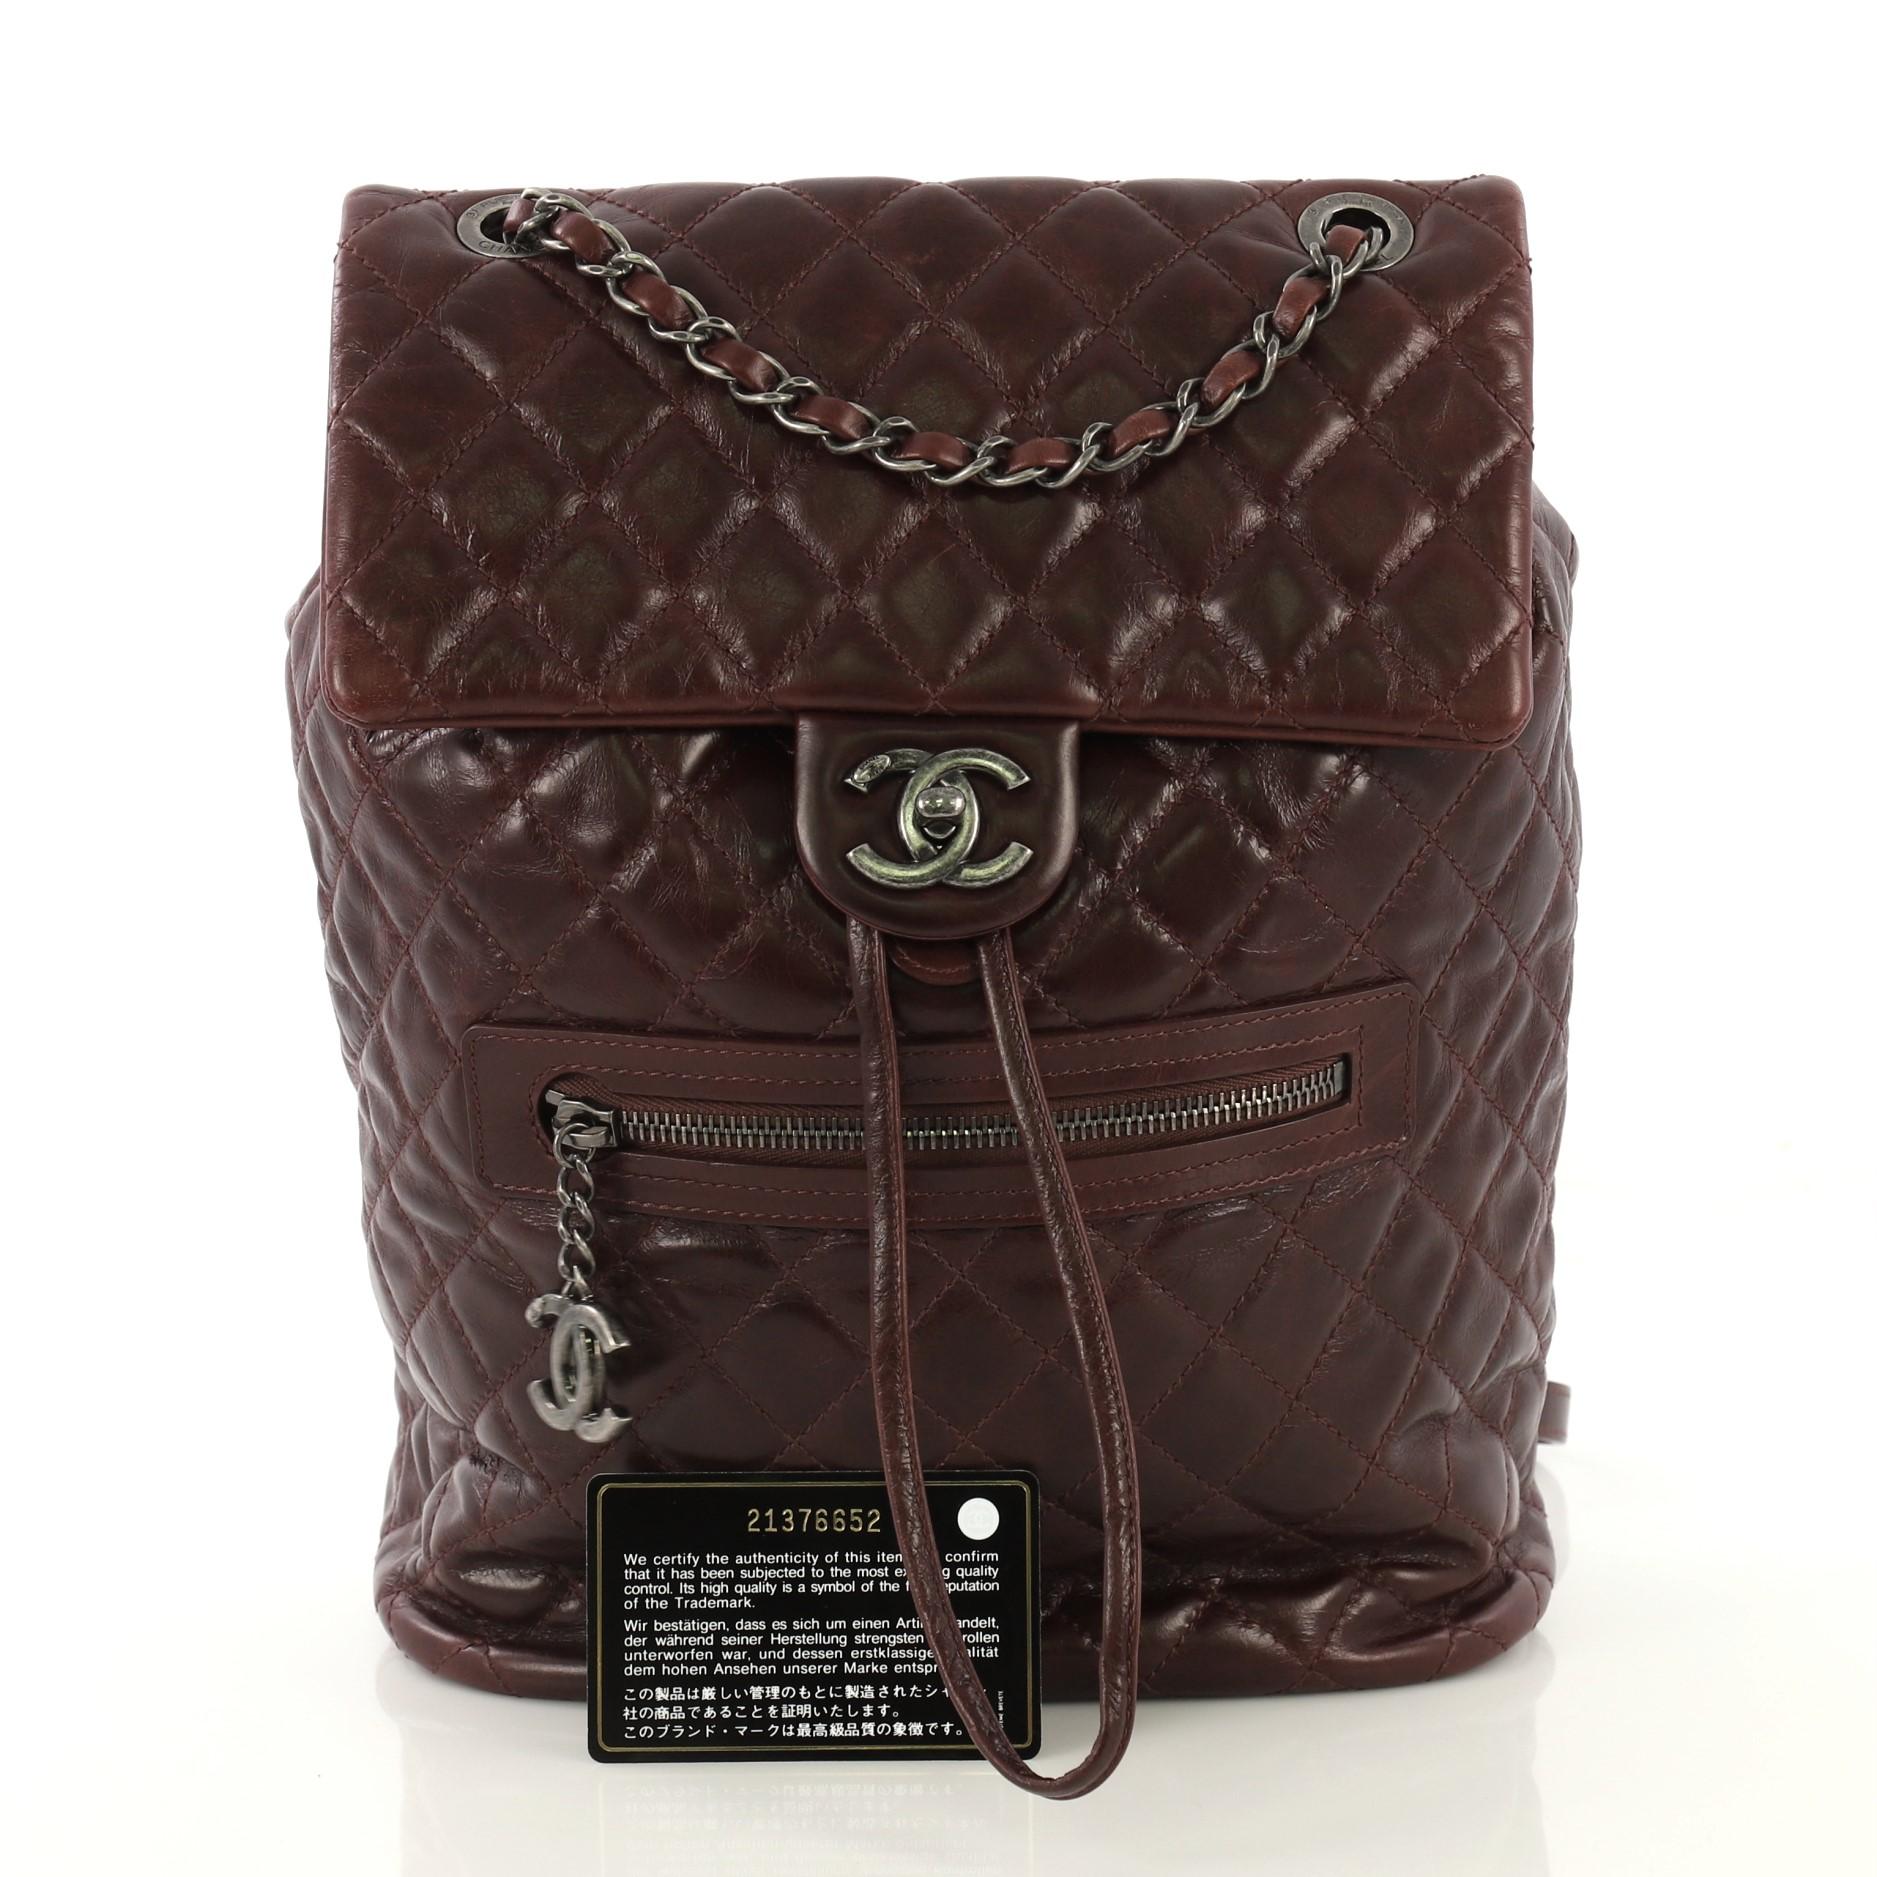 This Chanel Mountain Backpack Quilted Glazed Calfskin Large, crafted from purple quilted glazed calfskin, features woven-in leather chain top handle, flat leather backpack straps, an exterior front pocket with CC logo zipper, exterior back slip